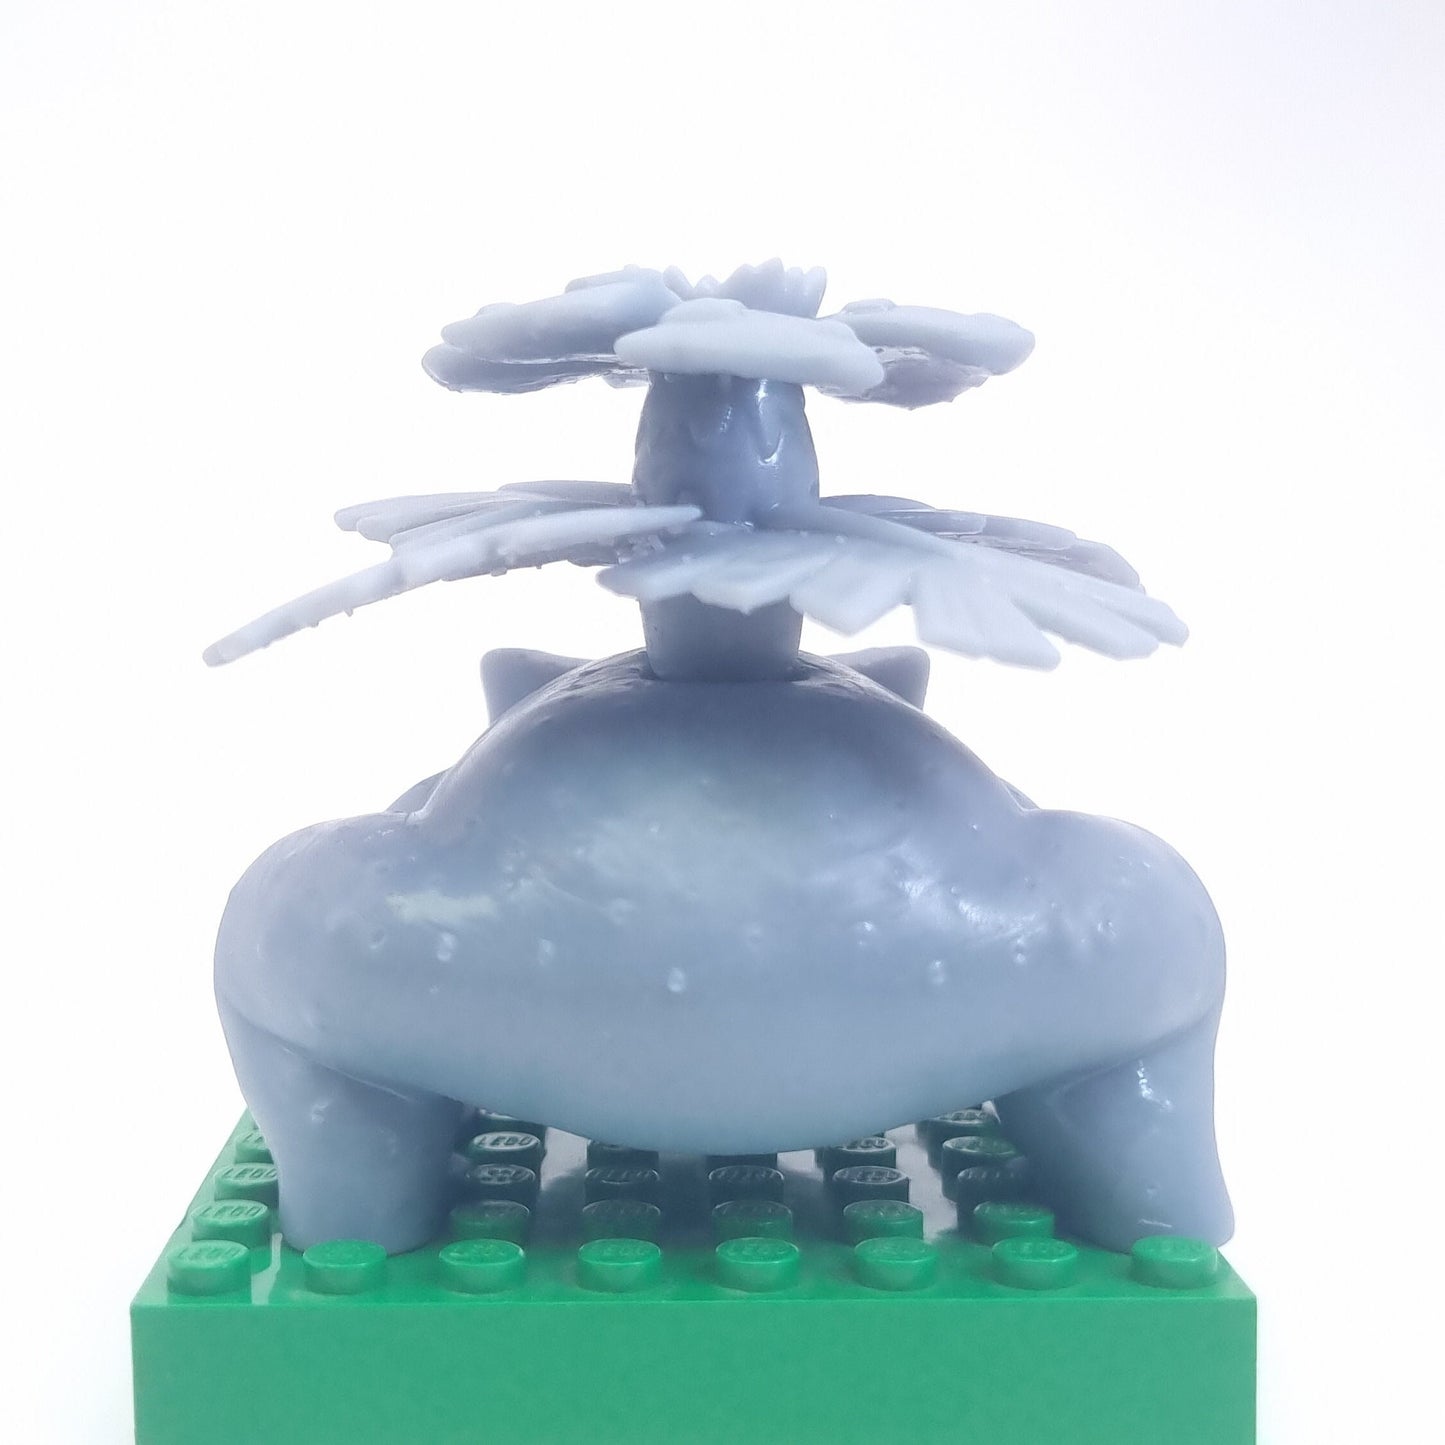 Building toy custom 3D printed creature with tree on his back!